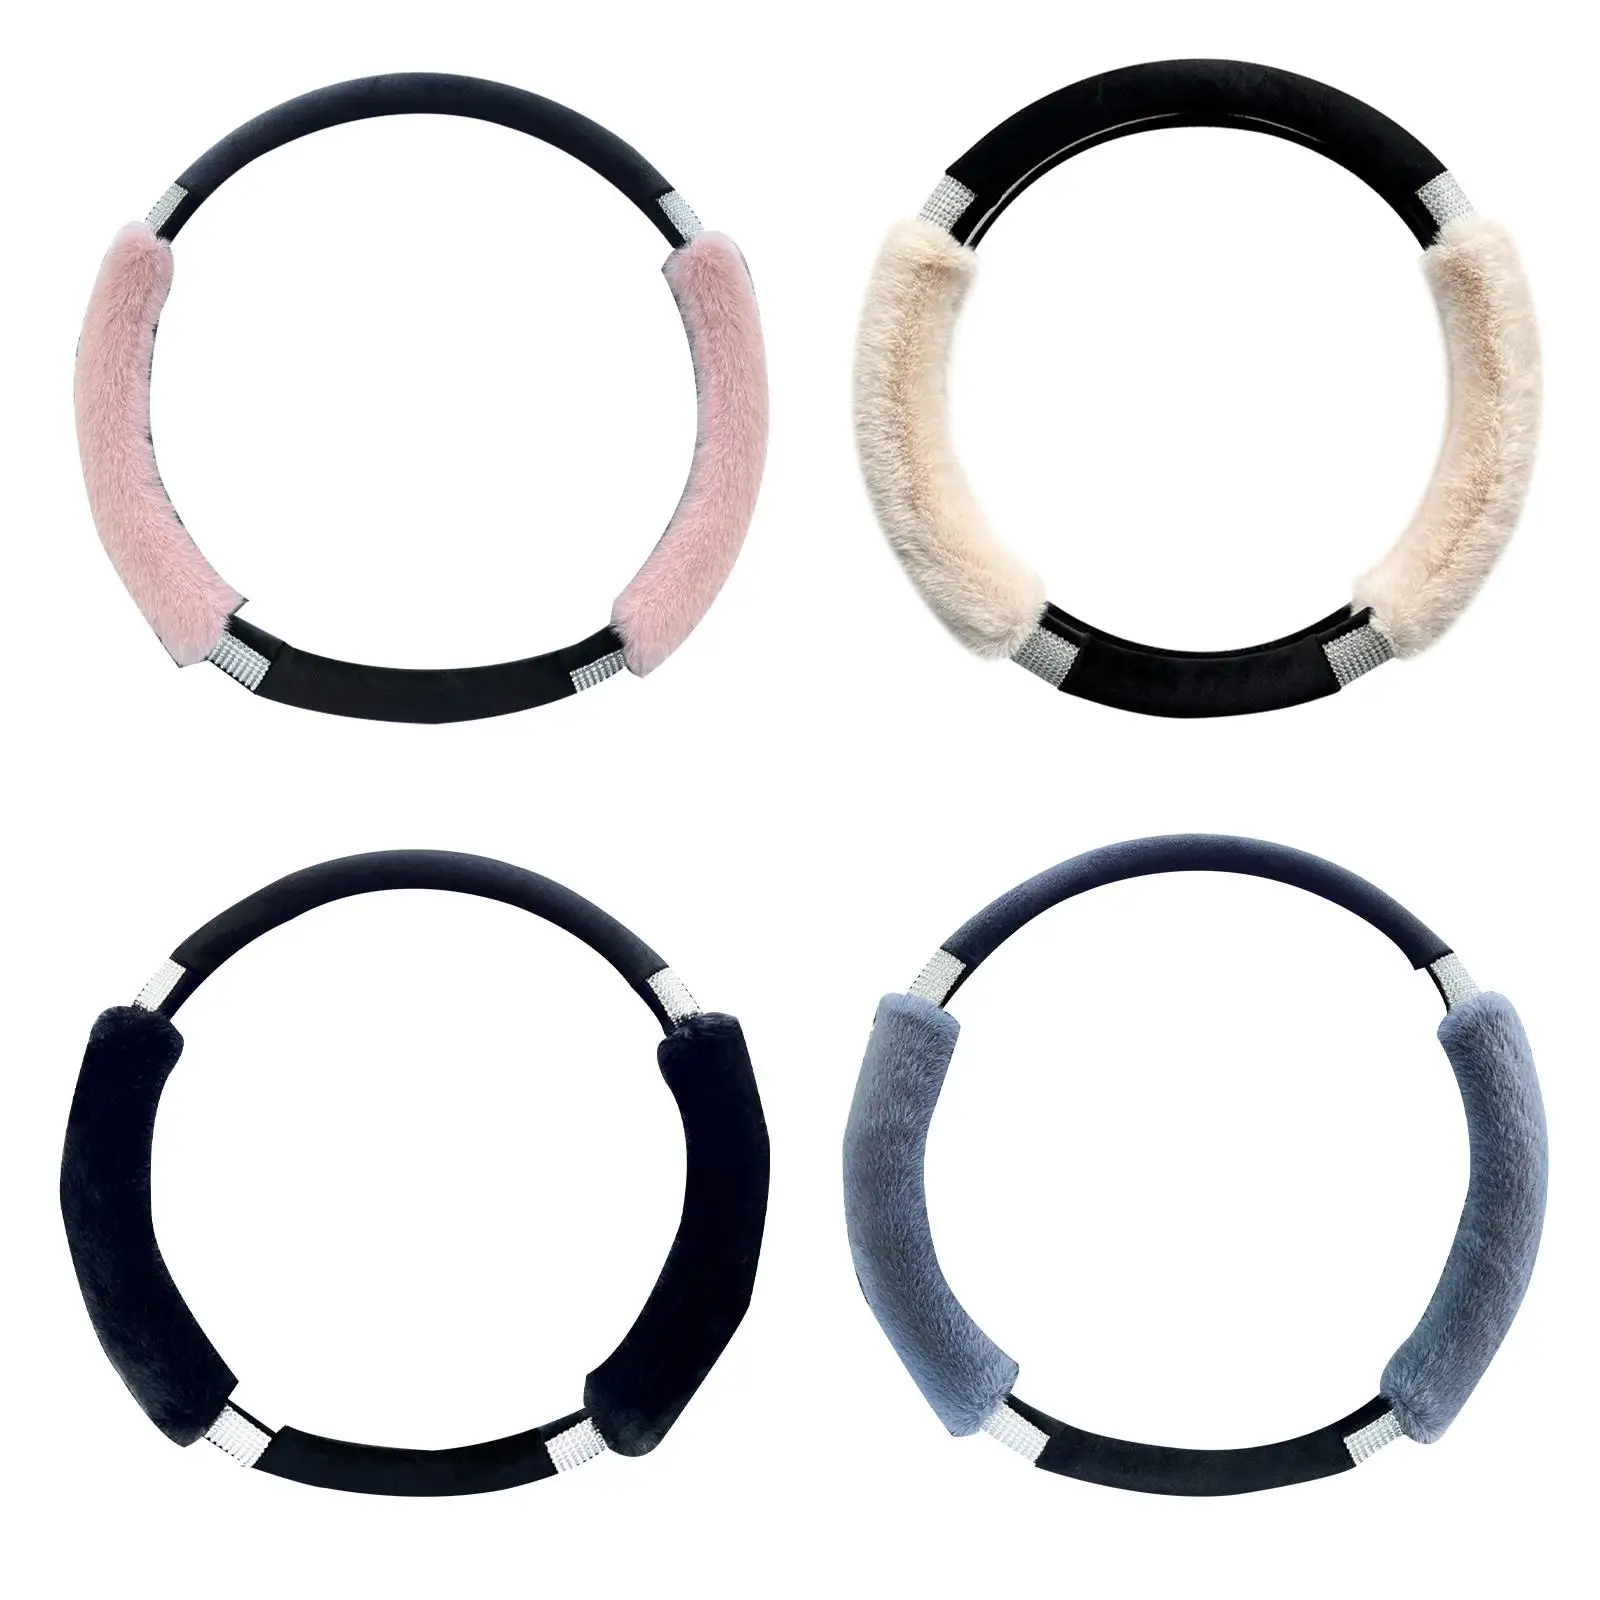 Car Steering Wheel Cover Protector Plush 15 inch Odorless Soft Classic Durable Winter Warm